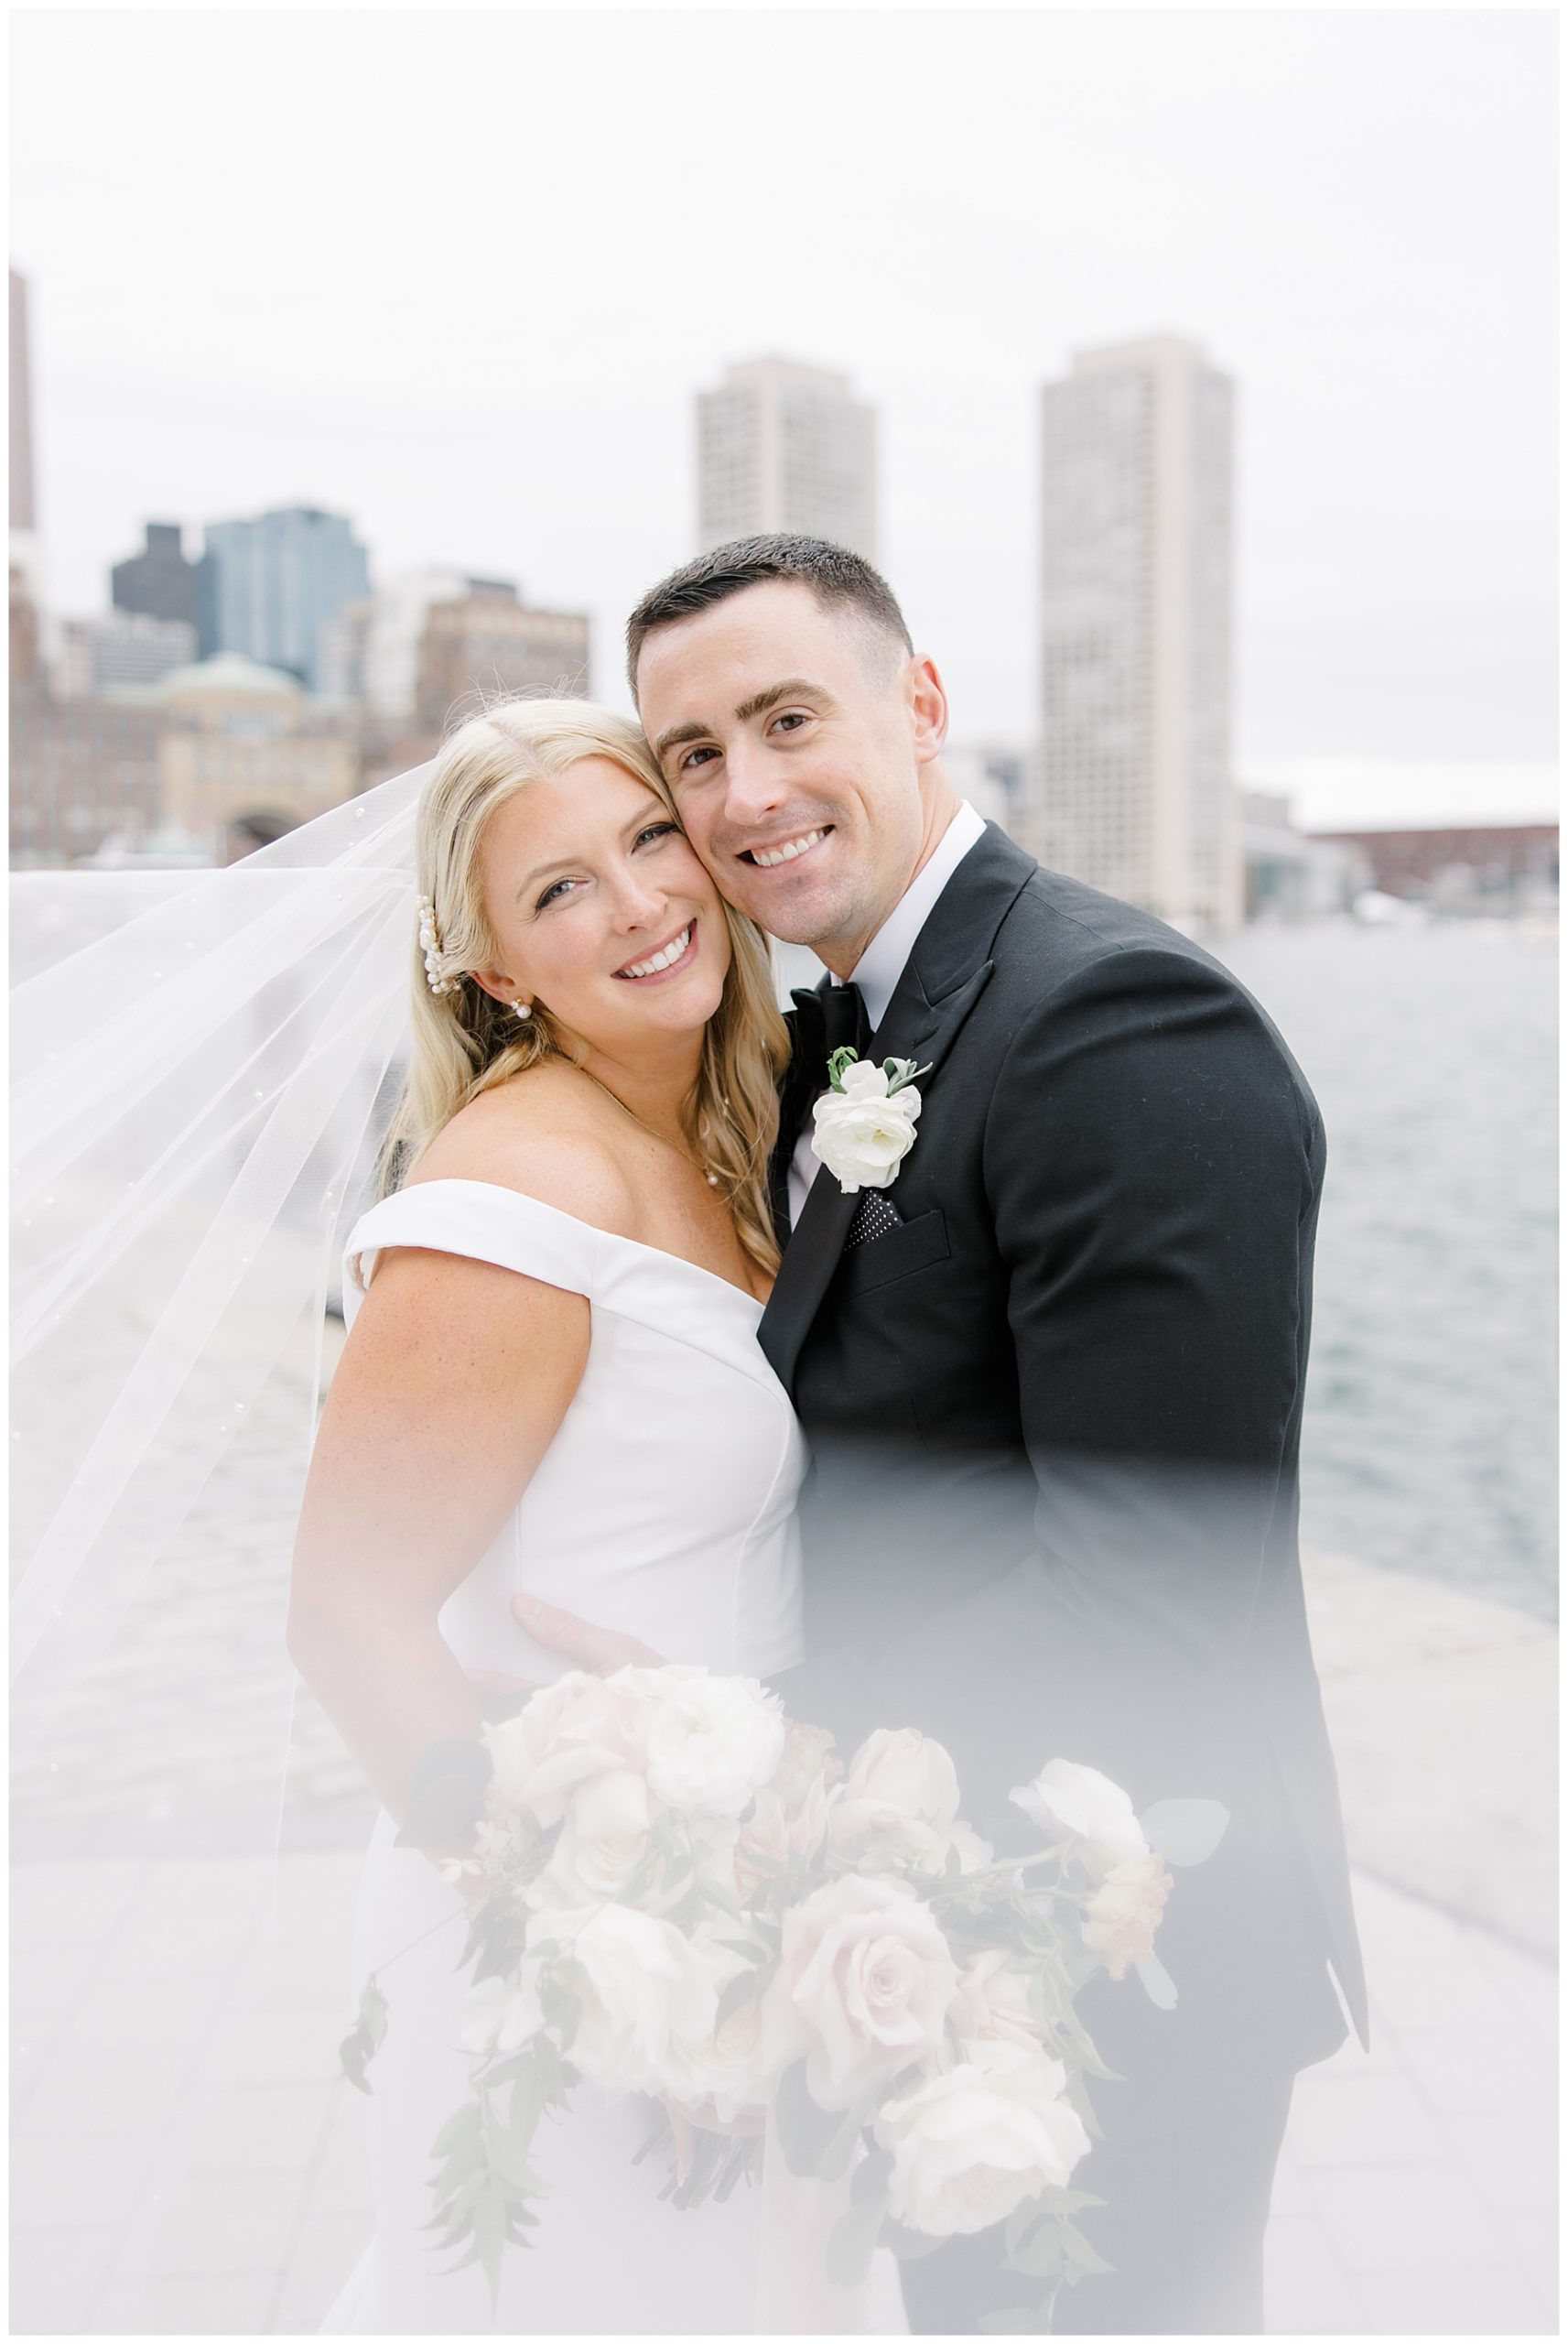 Fan Pier Park wedding portraits from Boston City Dream Wedding at The State Room: A Longwood Venue